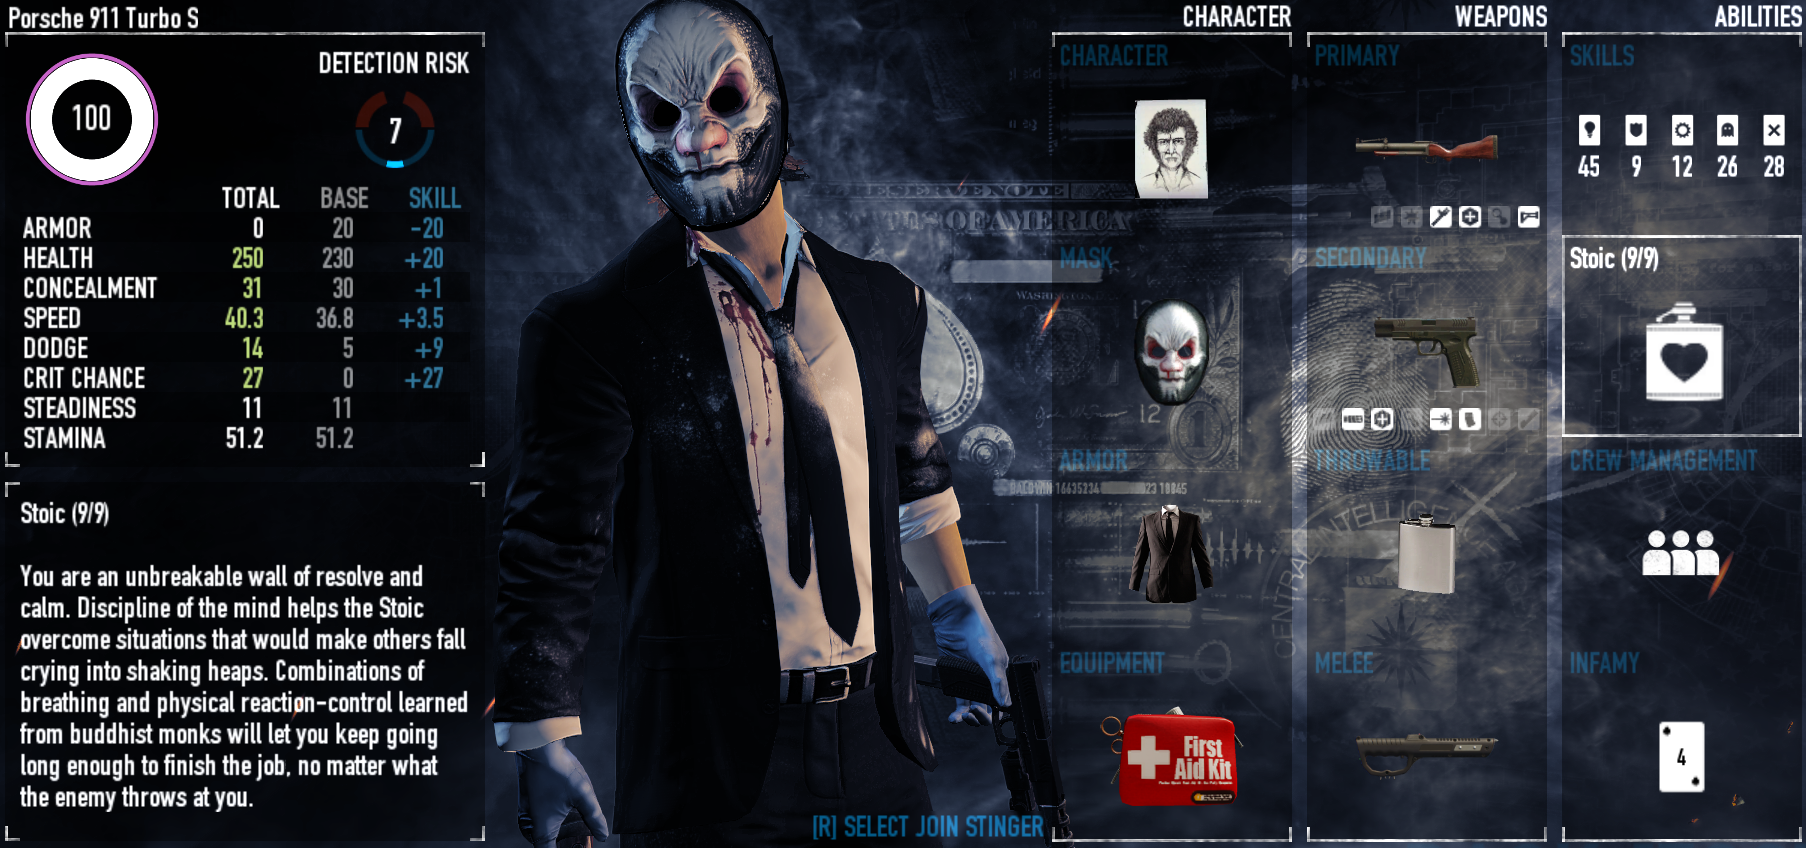 PAYDAY 2 - Stoic Build for Death Sentence - Loadout - 00F81FE